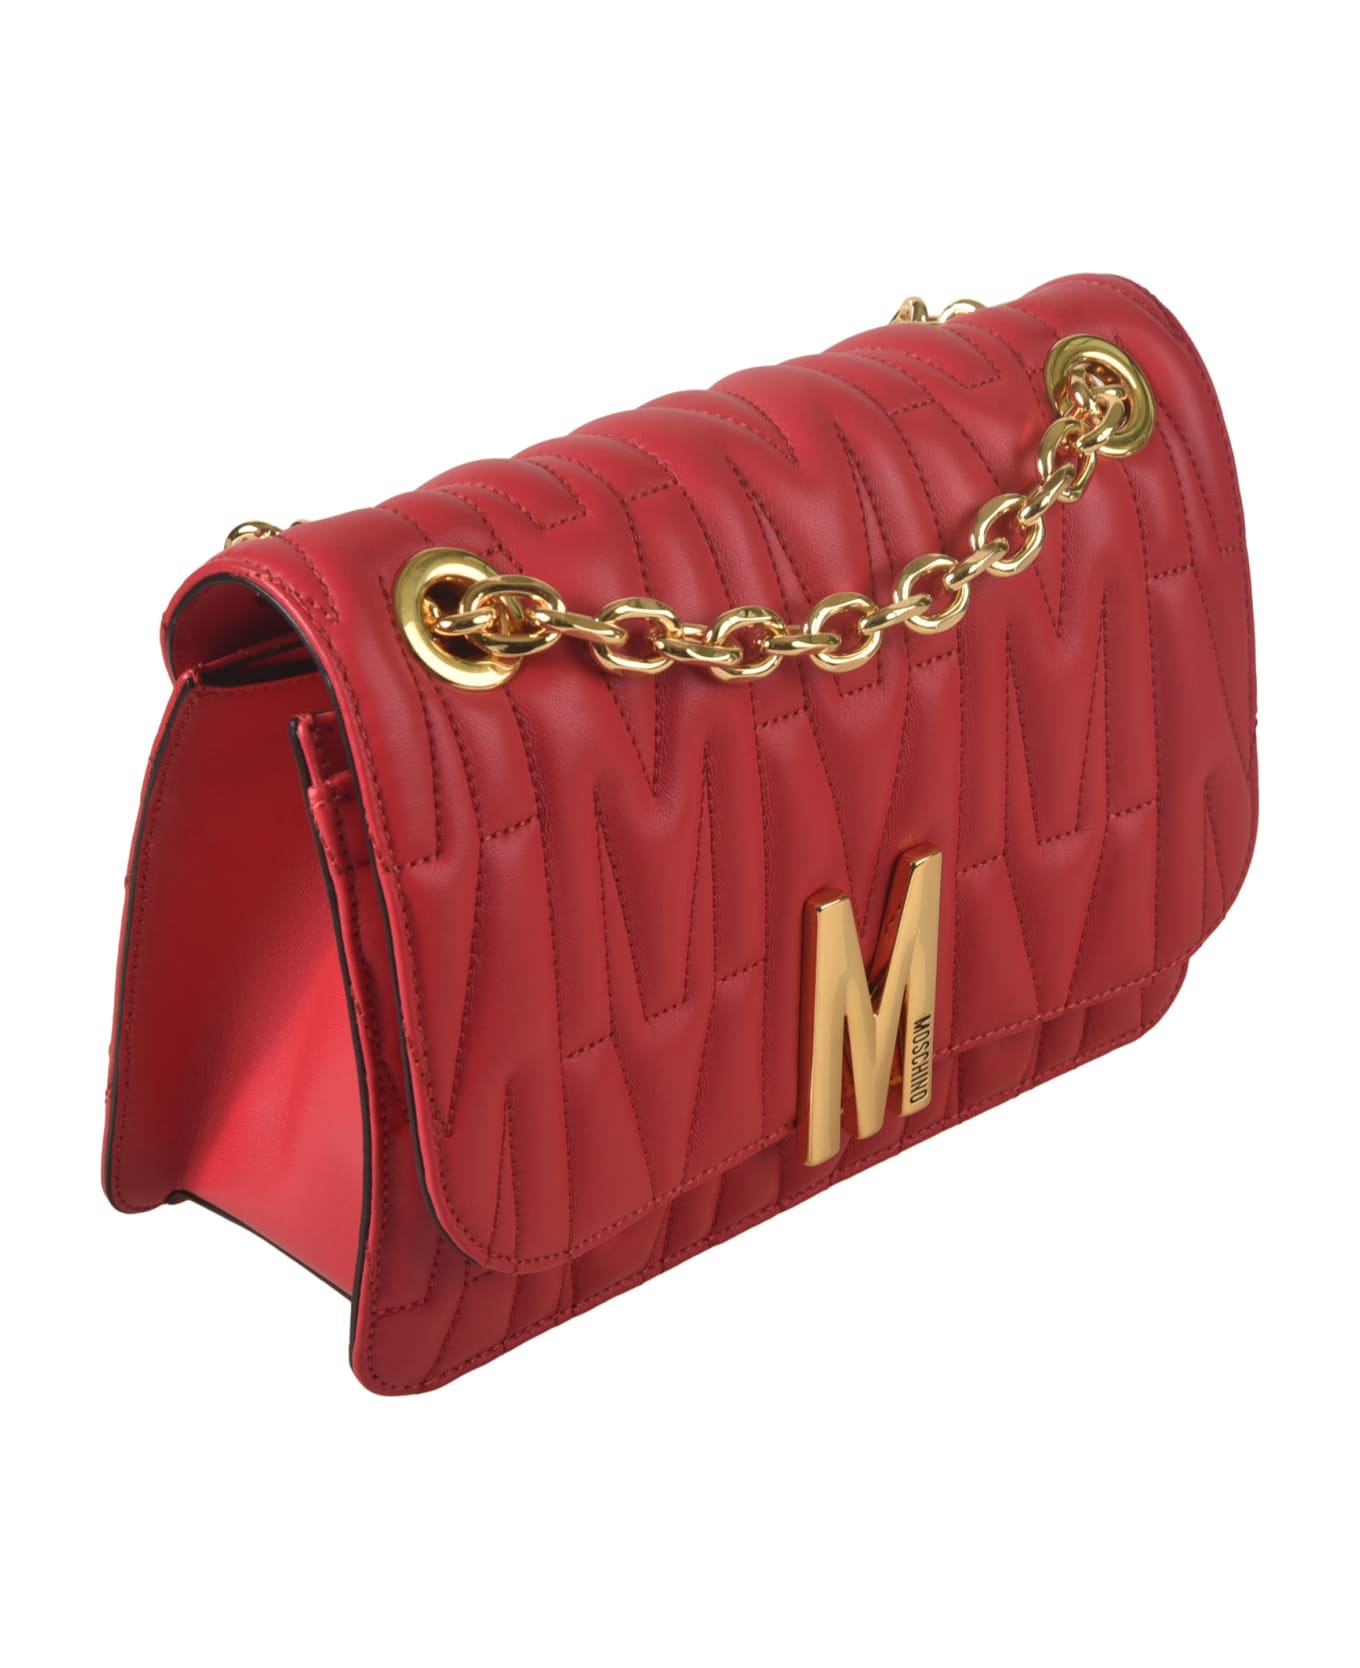 Moschino Logo Quilted Chain Shoulder Bag - Red